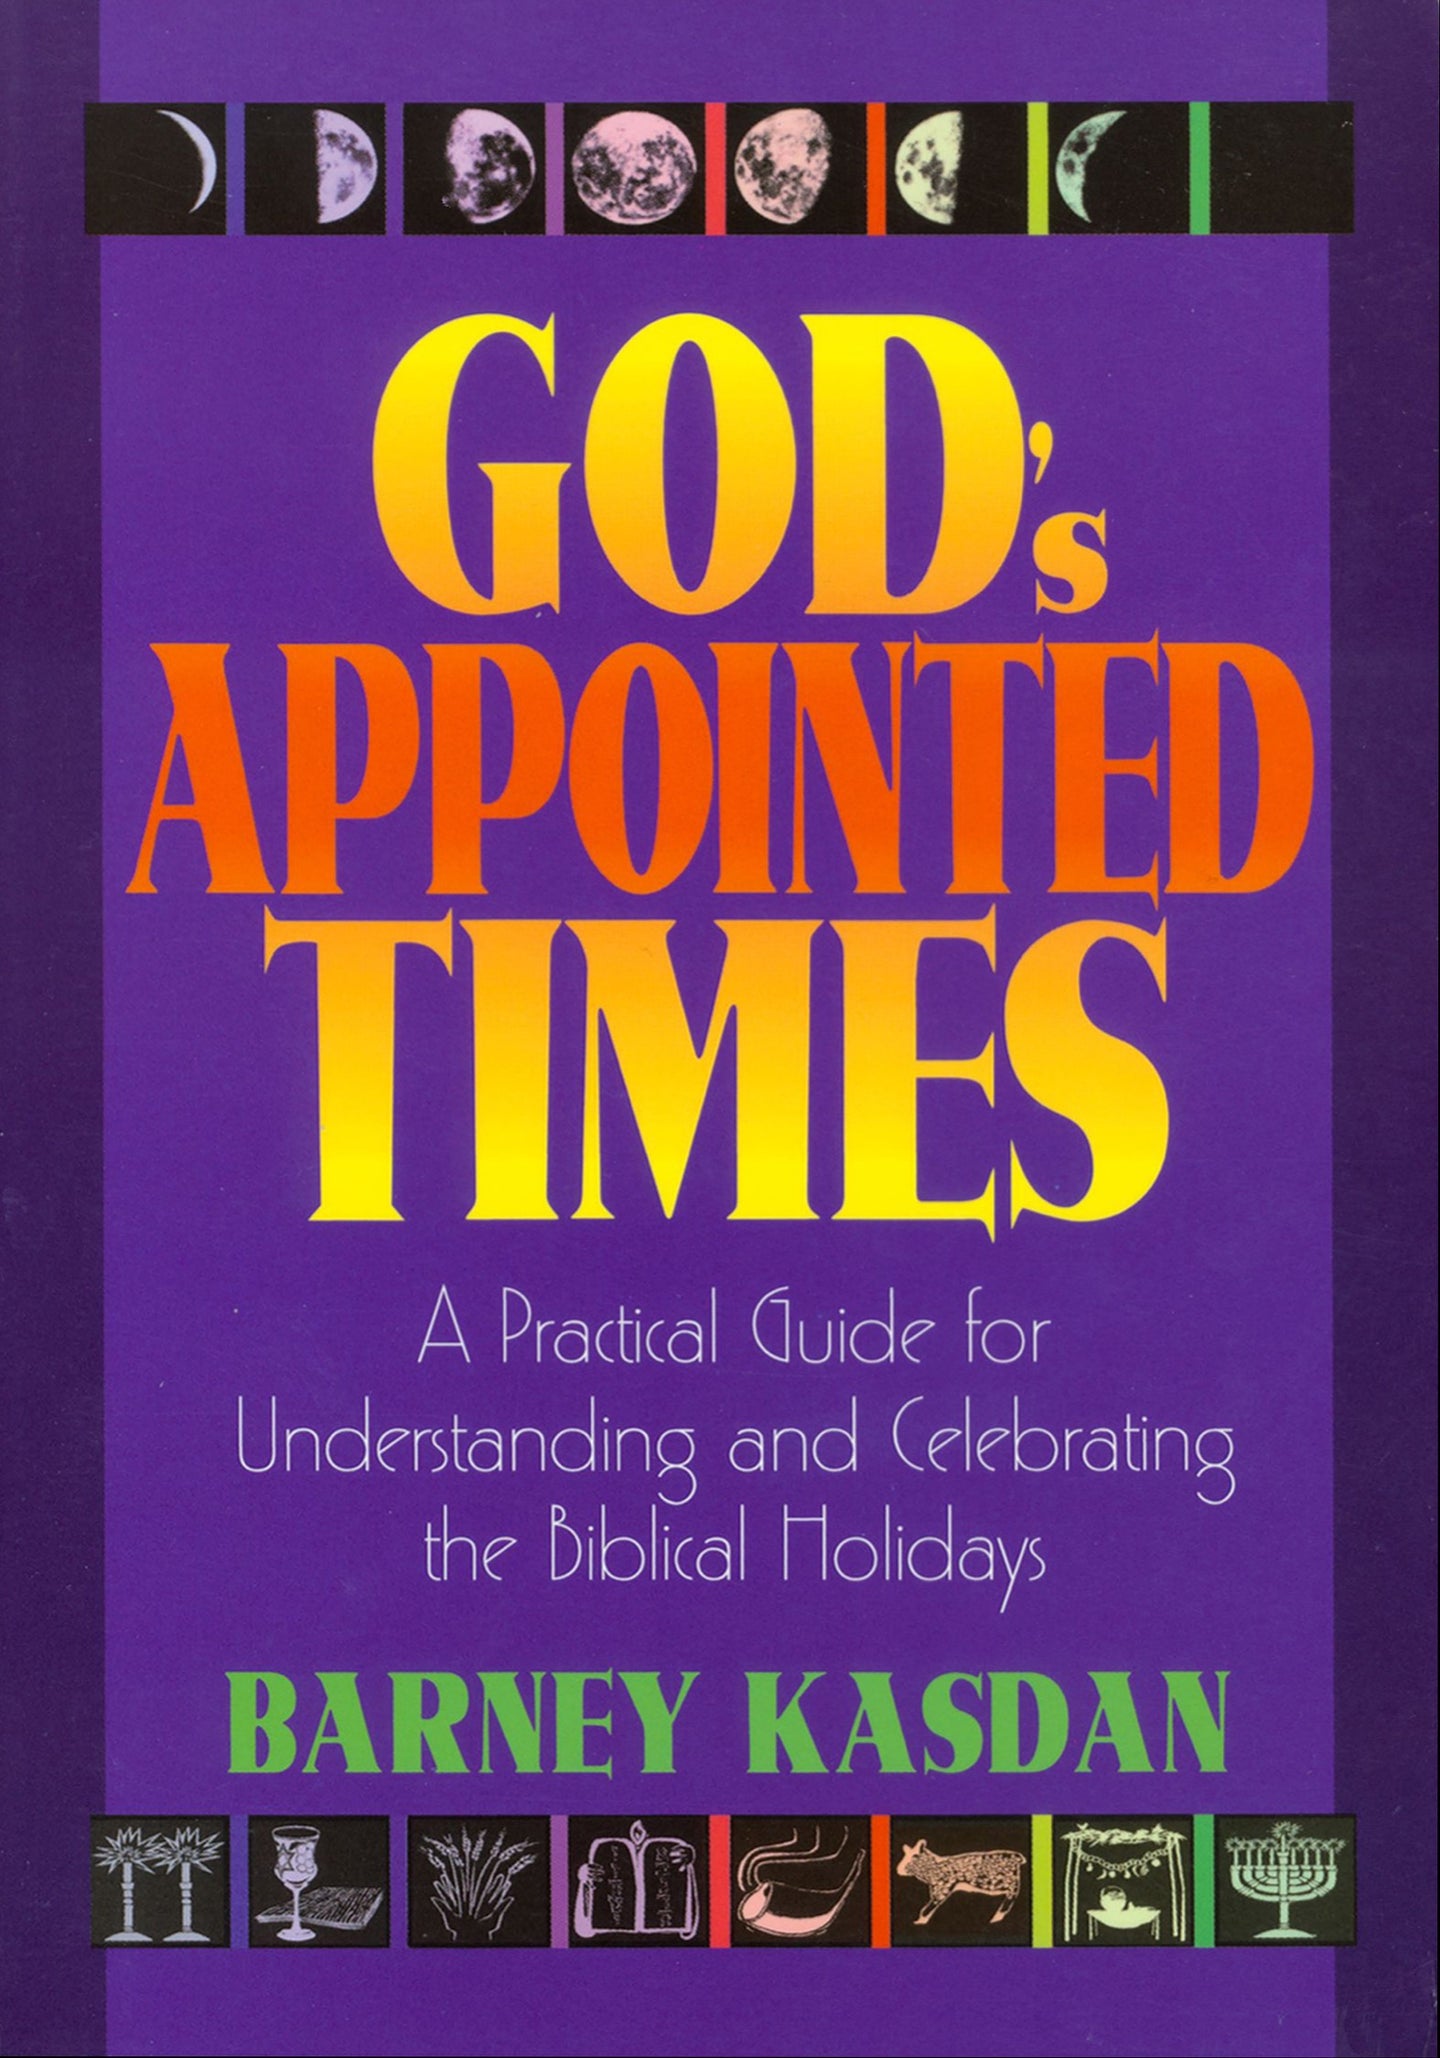 God's Appointed Times: A Practical Guide for Understanding and Celebrating the Biblical Holidays by Barney Kasdan    *See FREE Shavuot chapter in graphics under the book cover